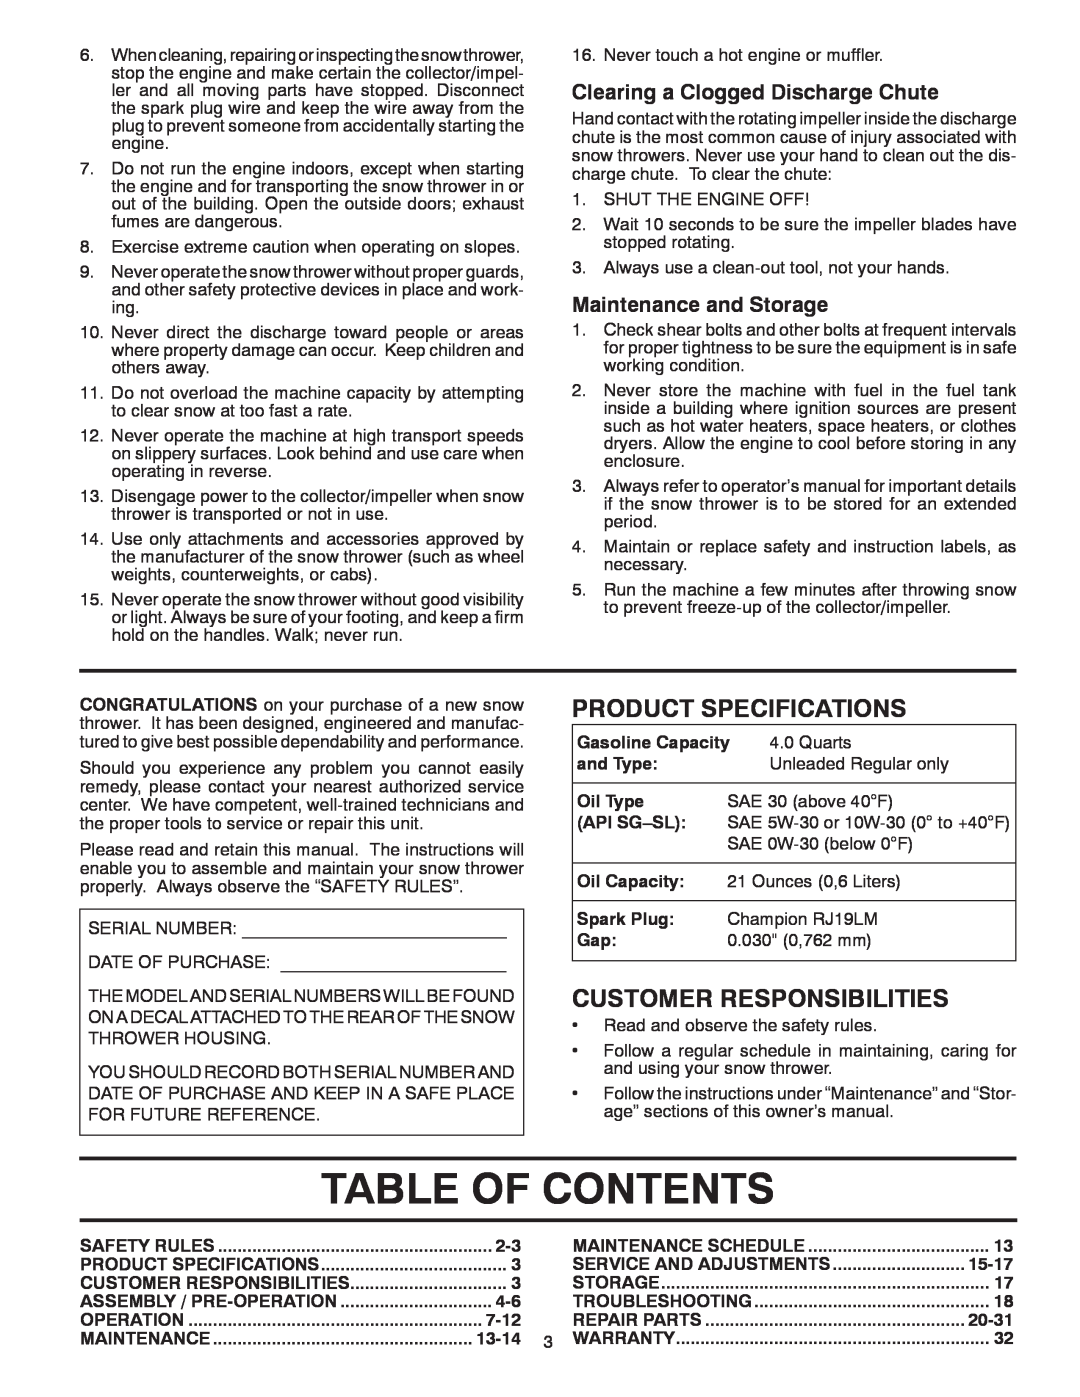 Poulan 421469 Table Of Contents, Product Specifications, Customer Responsibilities, Clearing a Clogged Discharge Chute 